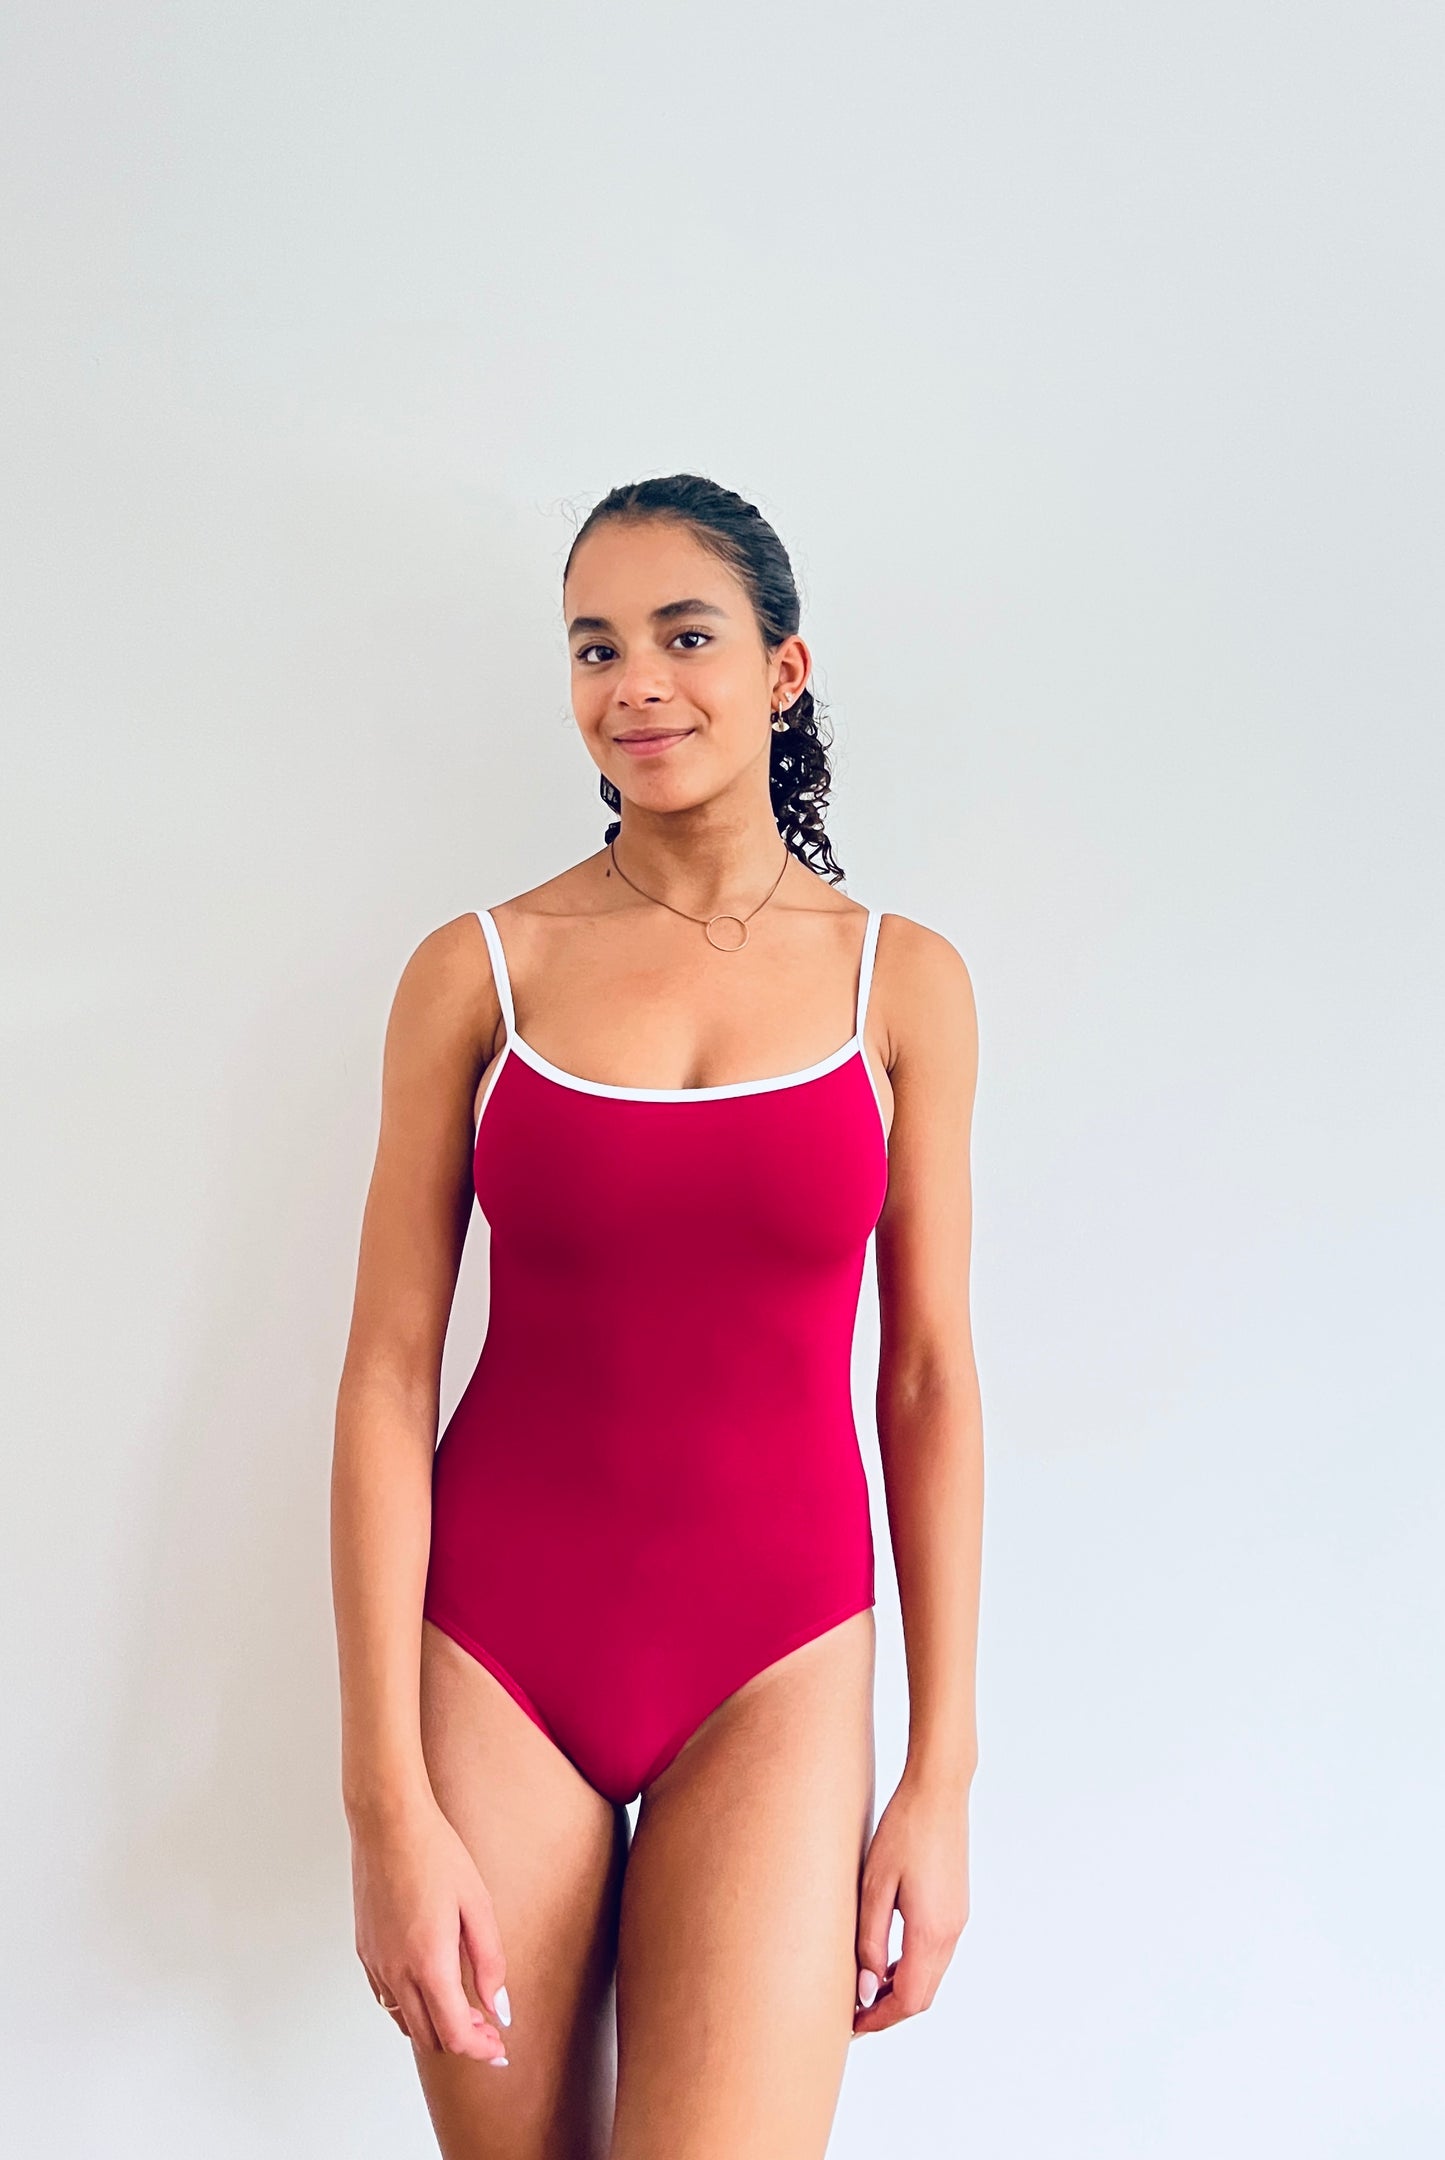 The Cerise one camisole ballet dance leotard from The Collective Dancewear 